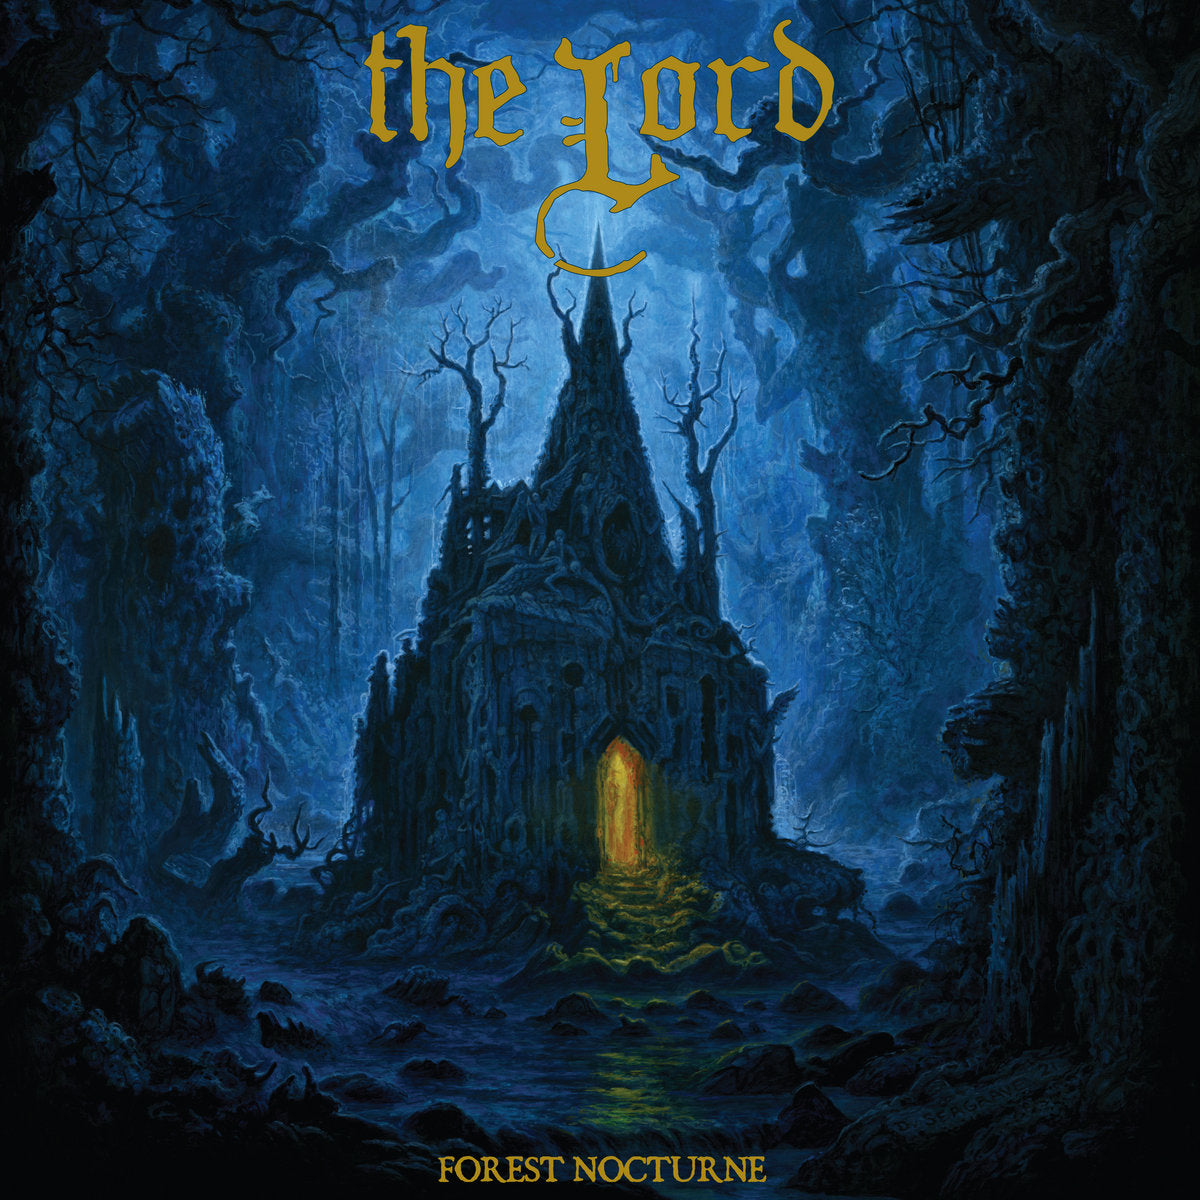 THE LORD - FOREST NOCTURNE Vinyl LP